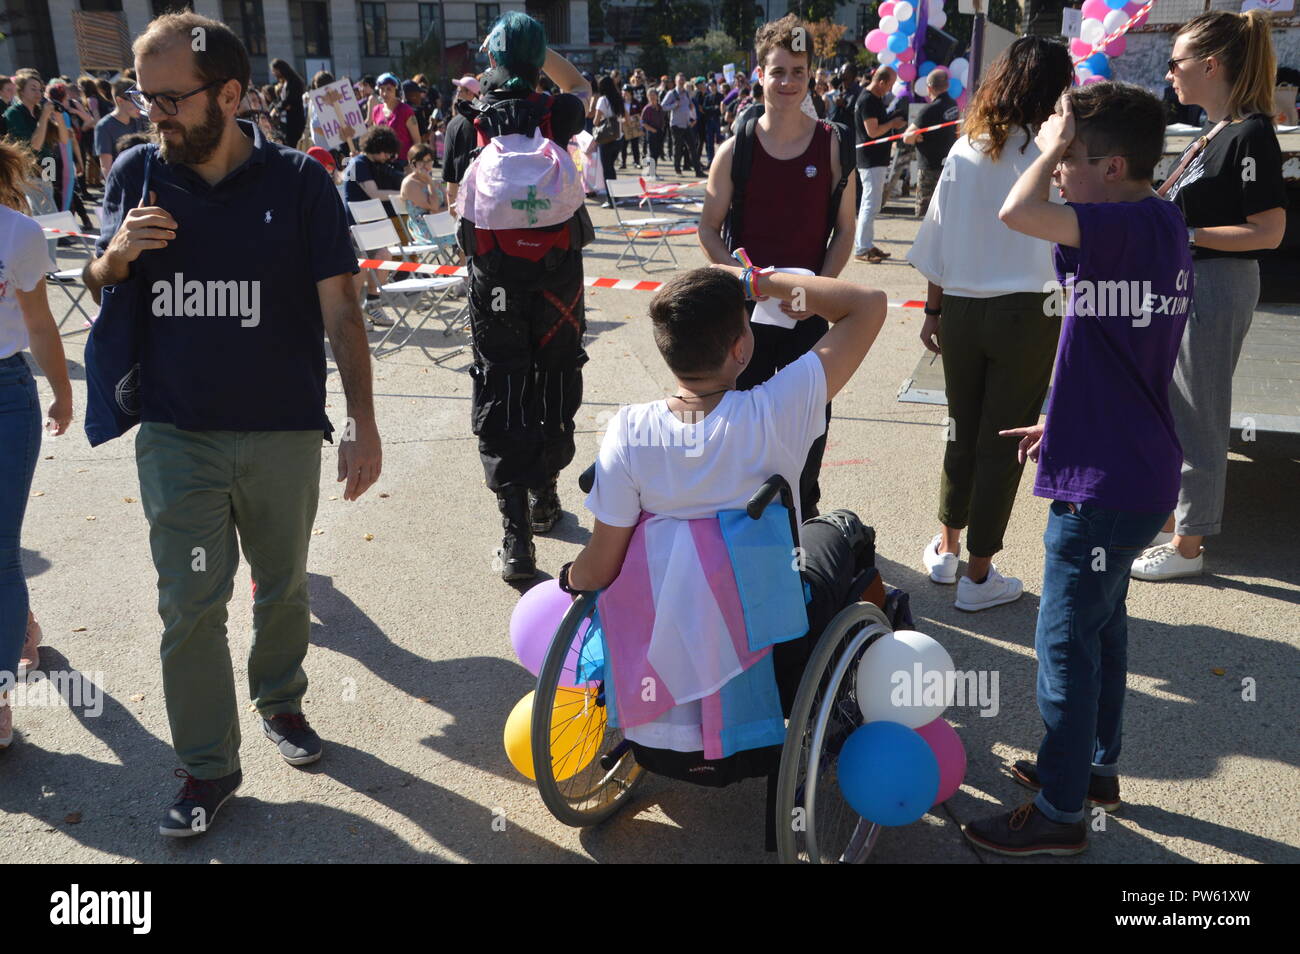 Paris, France. March ExisTrans for the rights of transexual people. Place Stalingrad, Paris, France. 13 October 2018. 14h.  ALPHACIT NEWIM / Alamy Live News Stock Photo